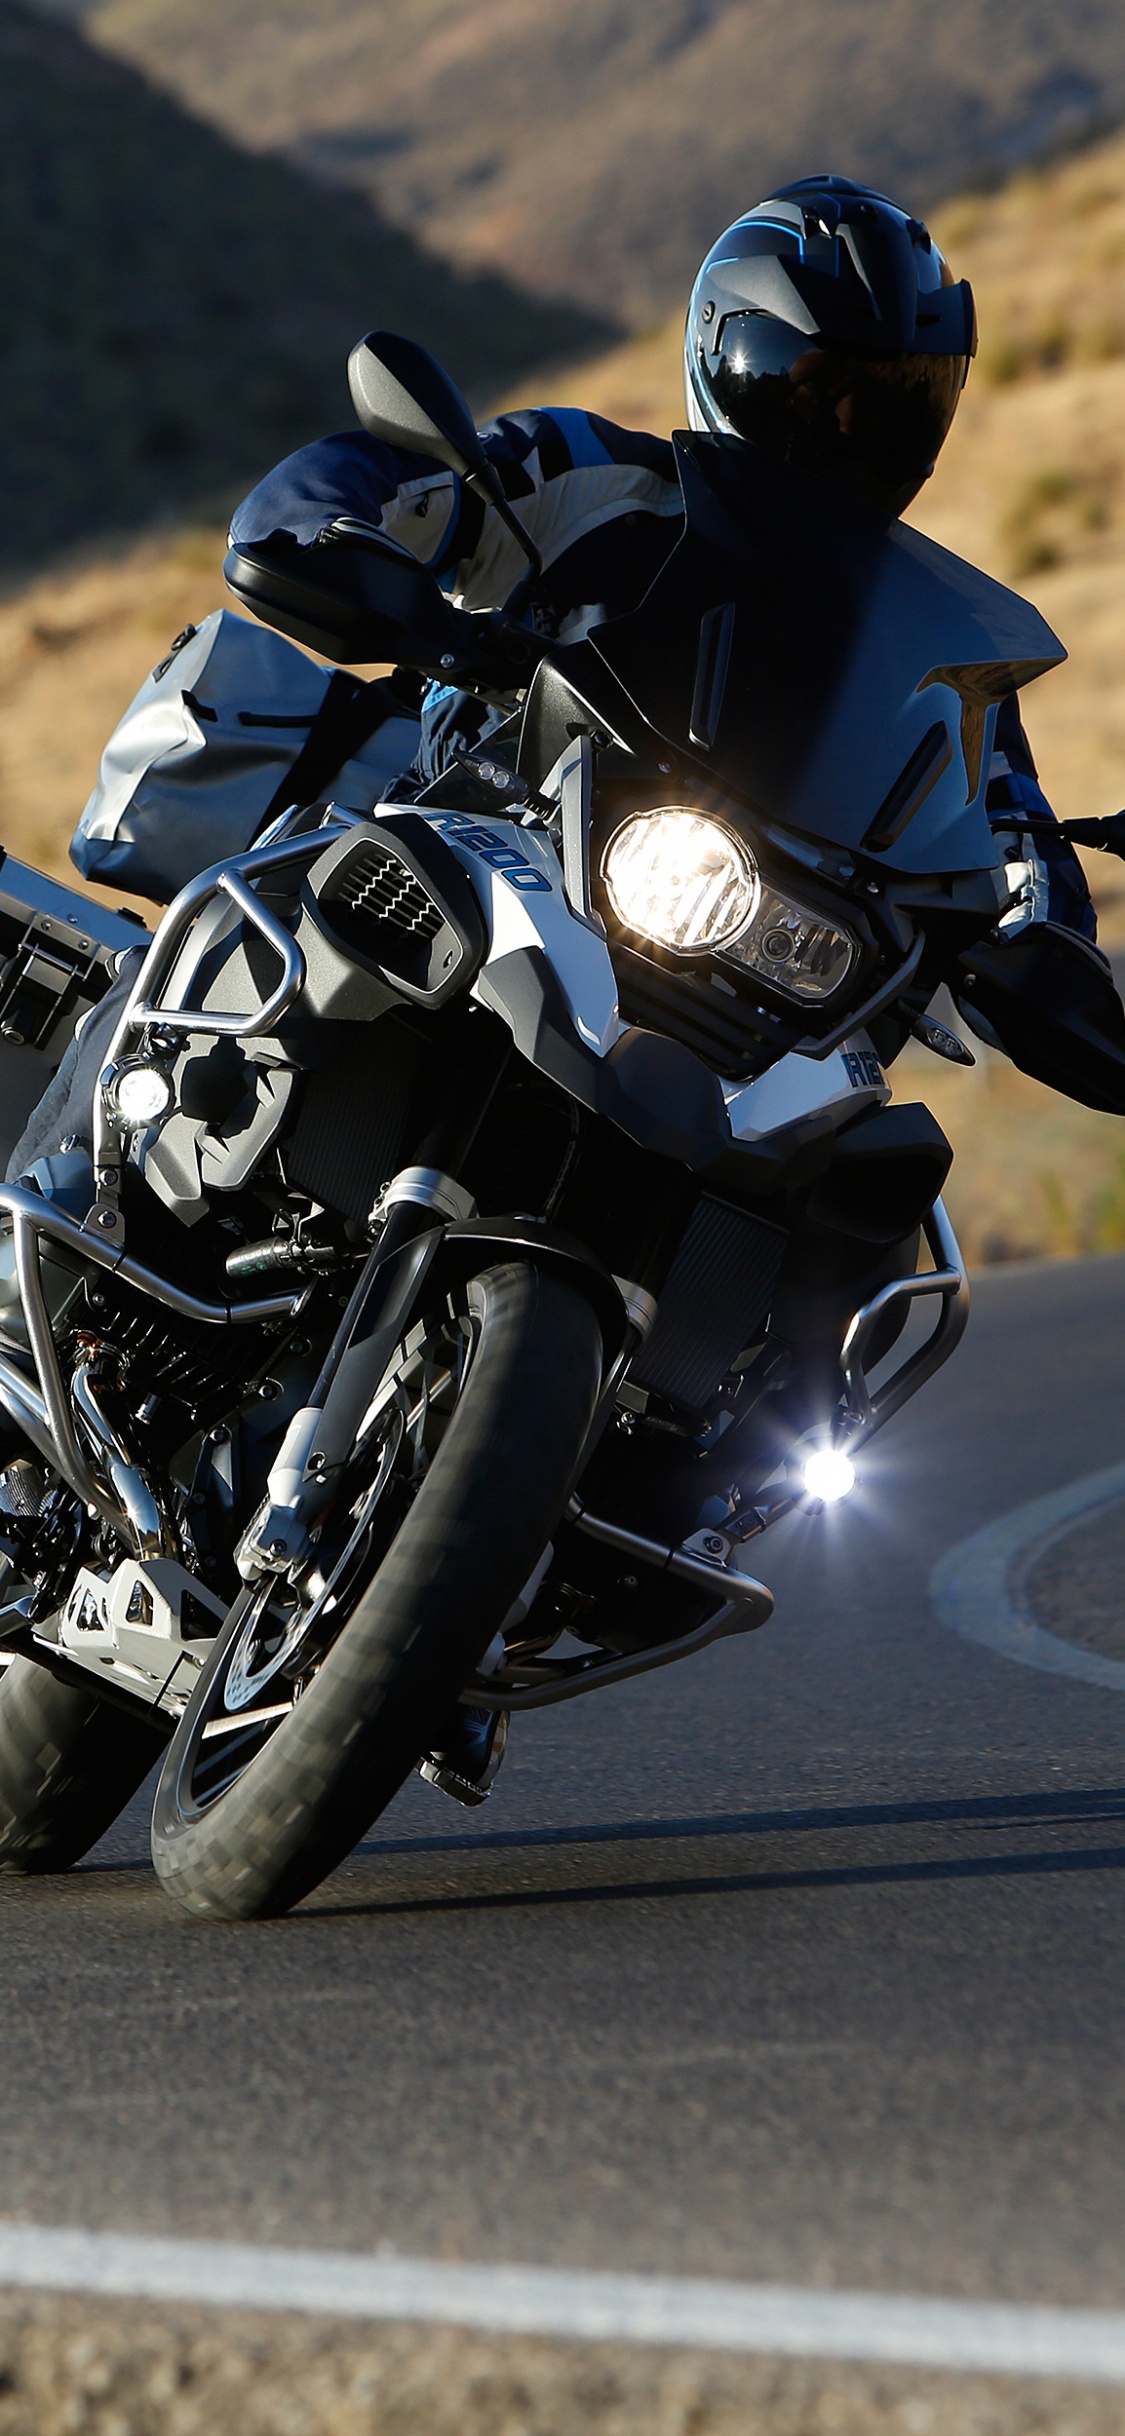 Man in Black Motorcycle Suit Riding Motorcycle on Road During Daytime. Wallpaper in 1125x2436 Resolution